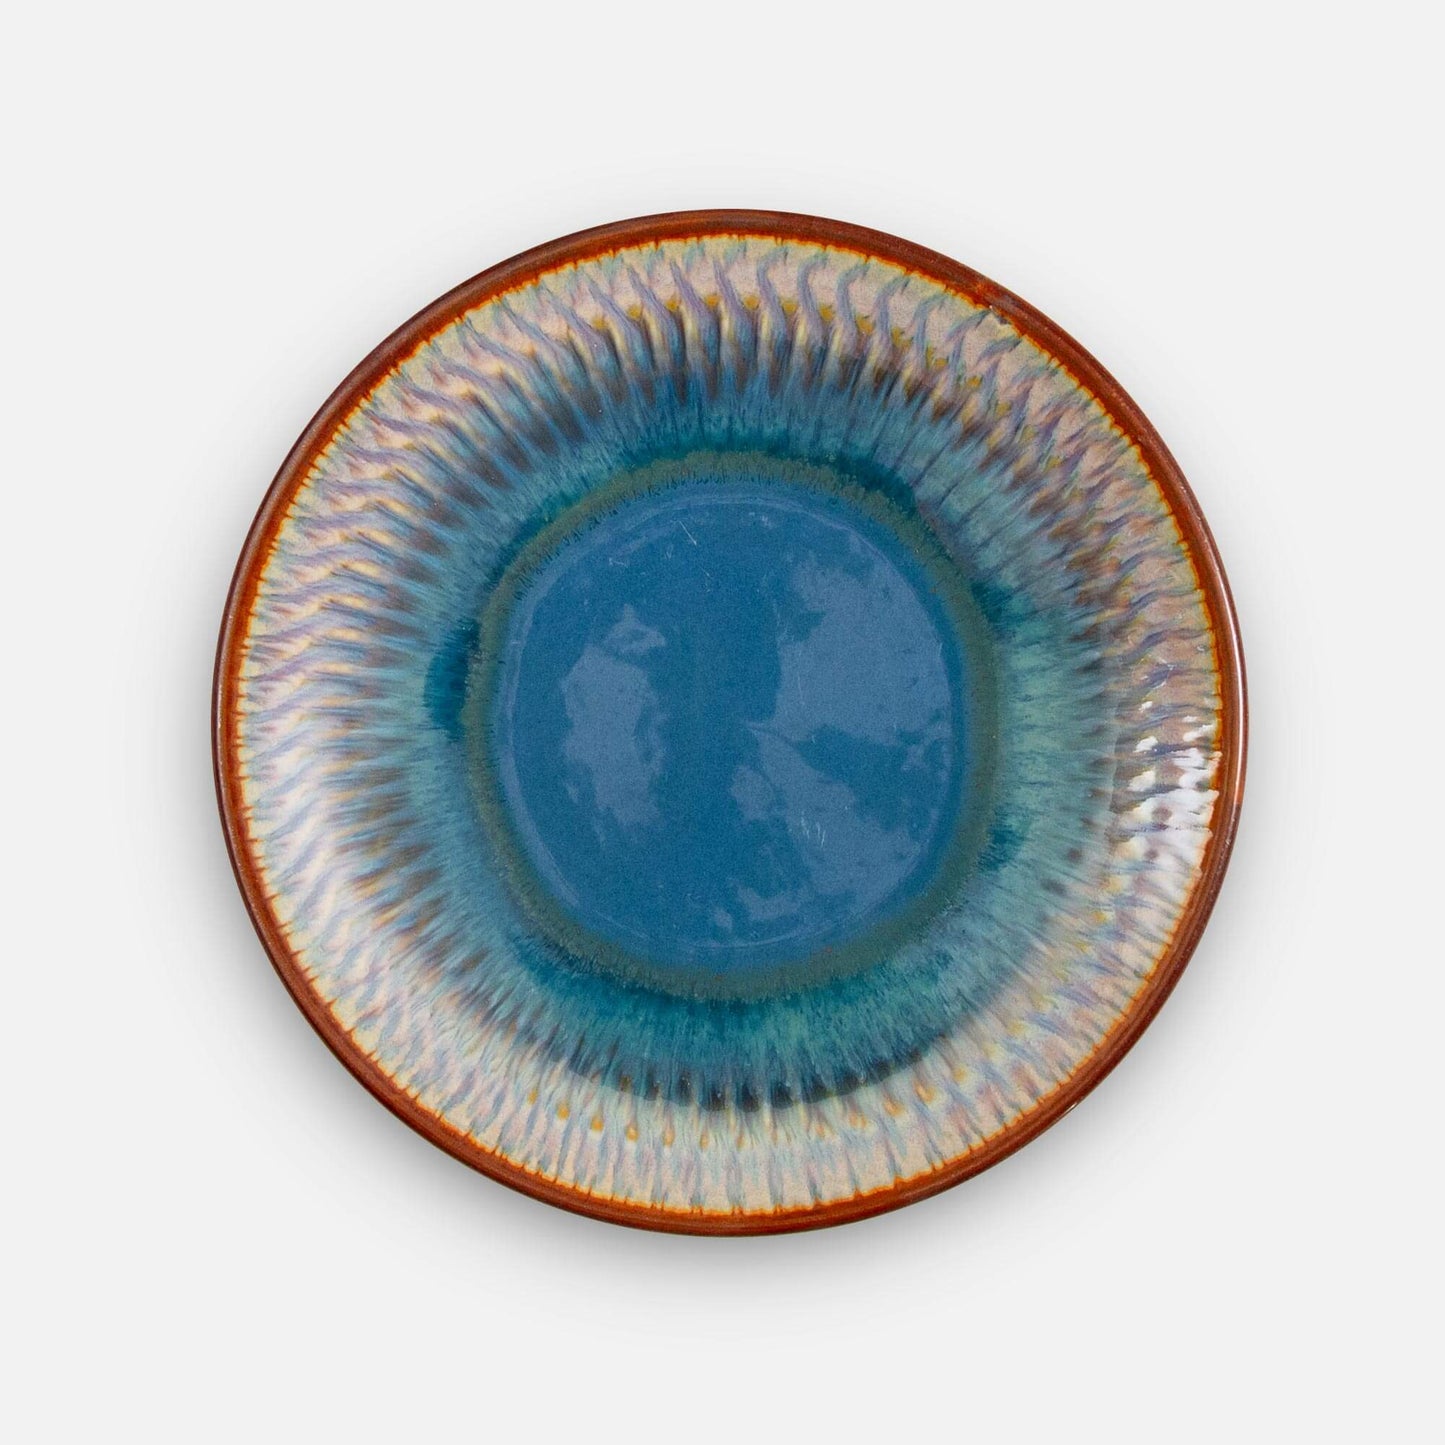 Handmade Pottery Footed Dinner Plate in Blue Oribe pattern made by Georgetown Pottery in Maine